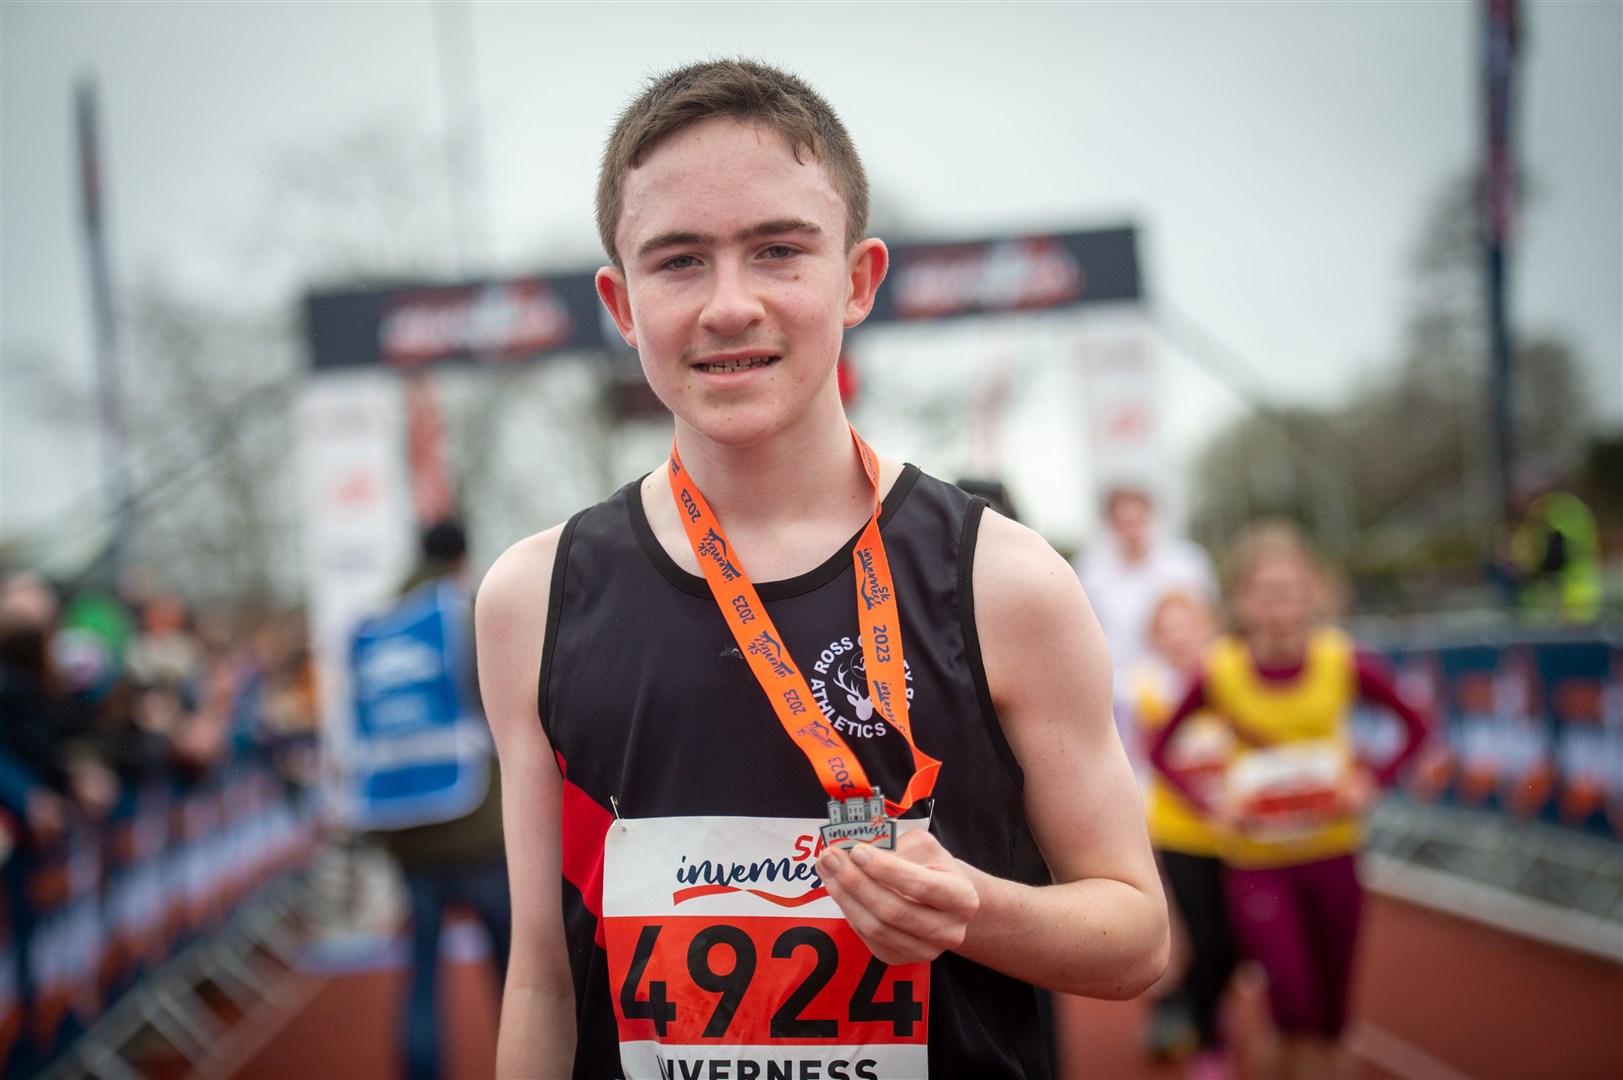 Lachlan Thomas also won the 5k race at the Inverness Half Marathon earlier this year. Picture: Callum Mackay